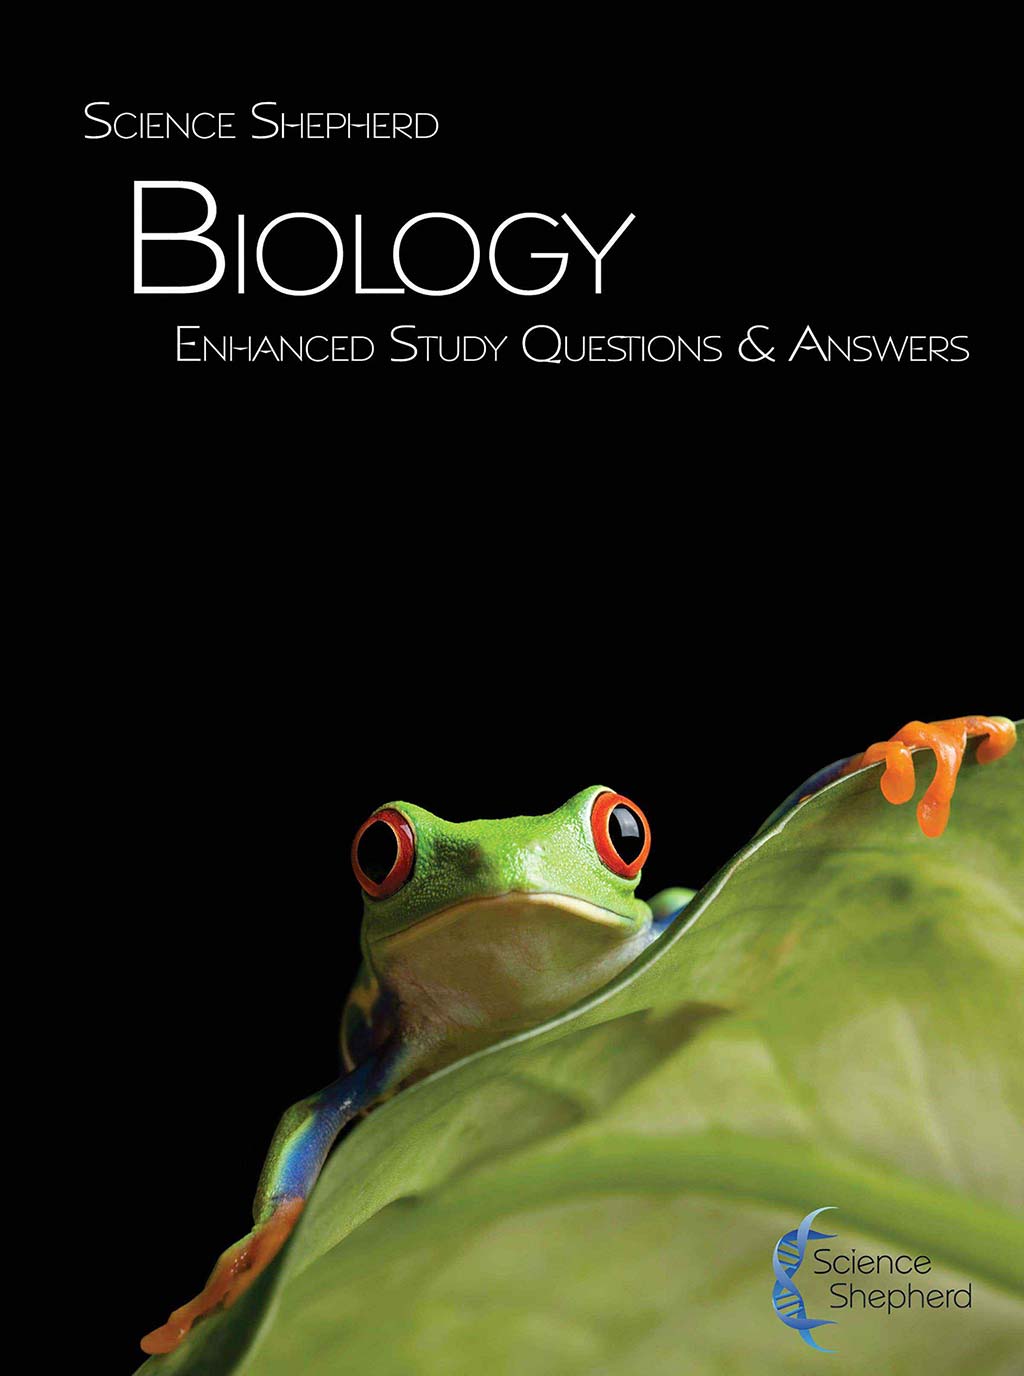 Science Shepherd Homeschooling Biology Study Question and Answer DVD cover of a frog on a leaf